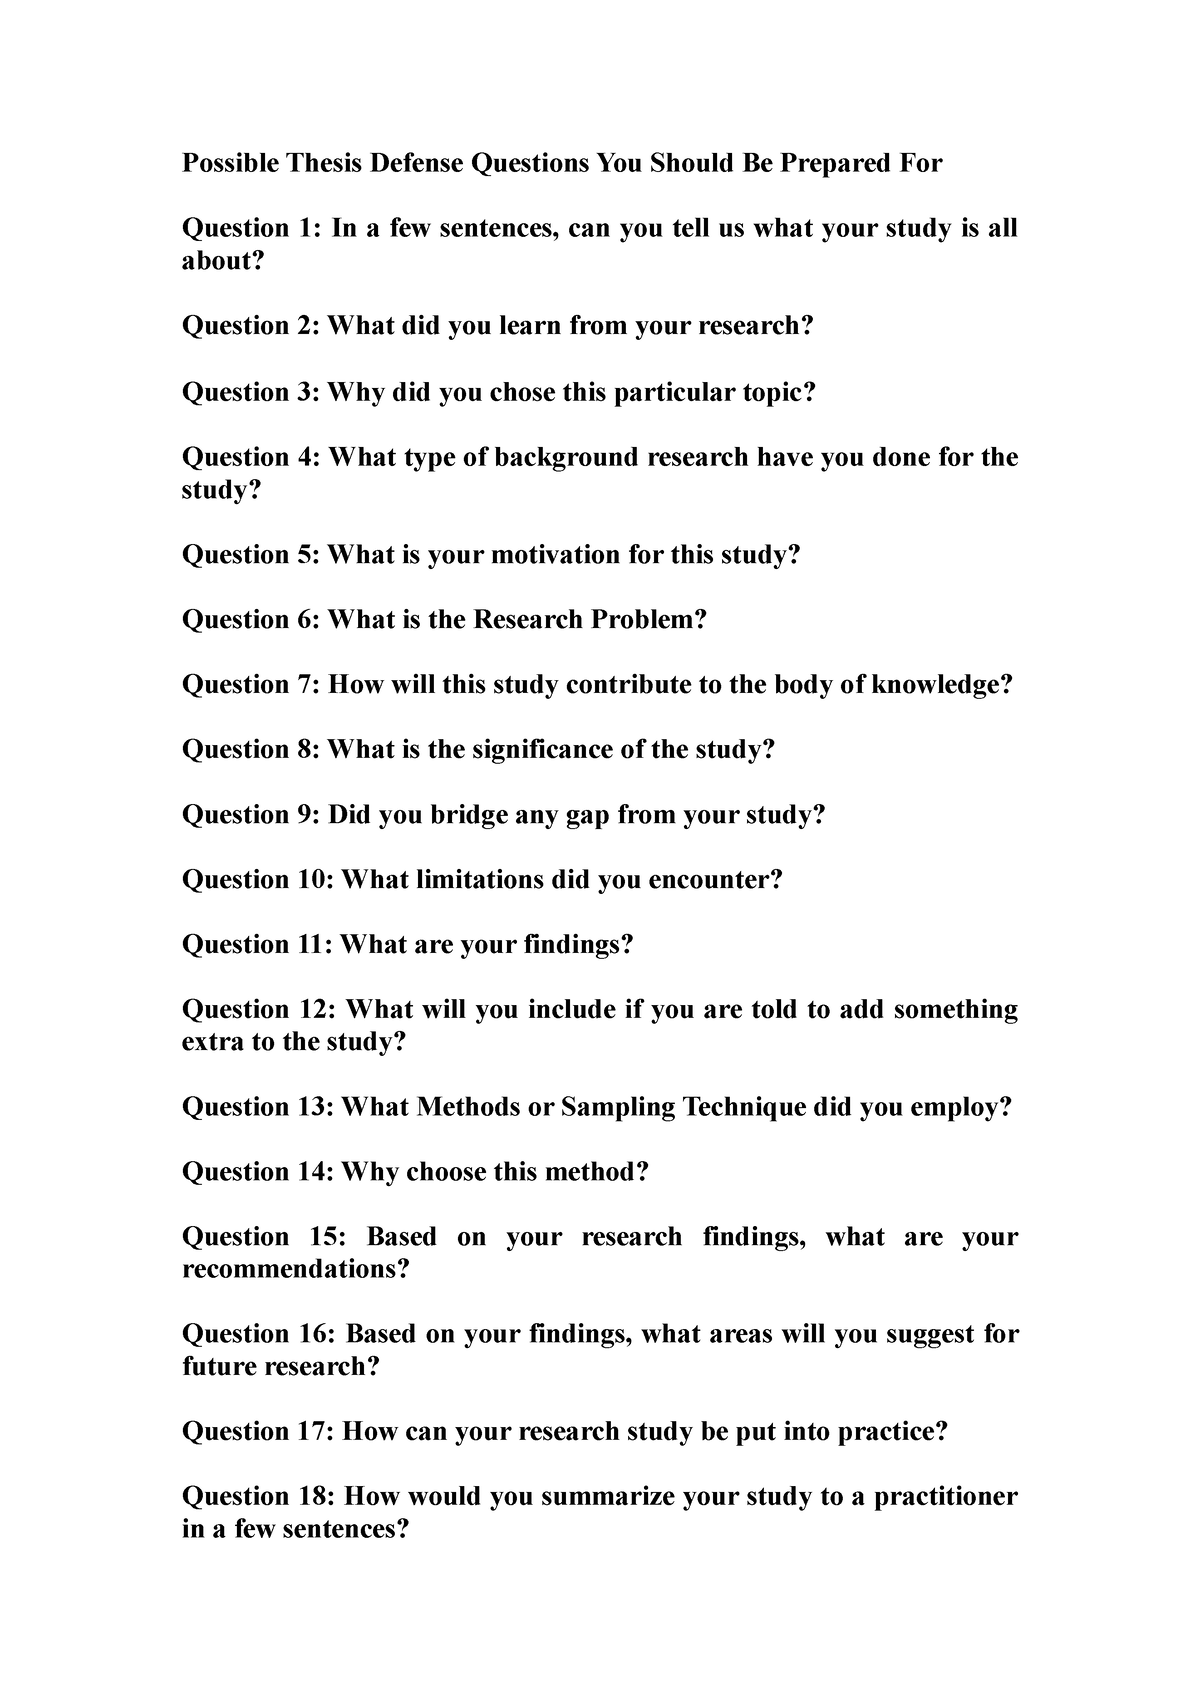 common questions in thesis proposal defense